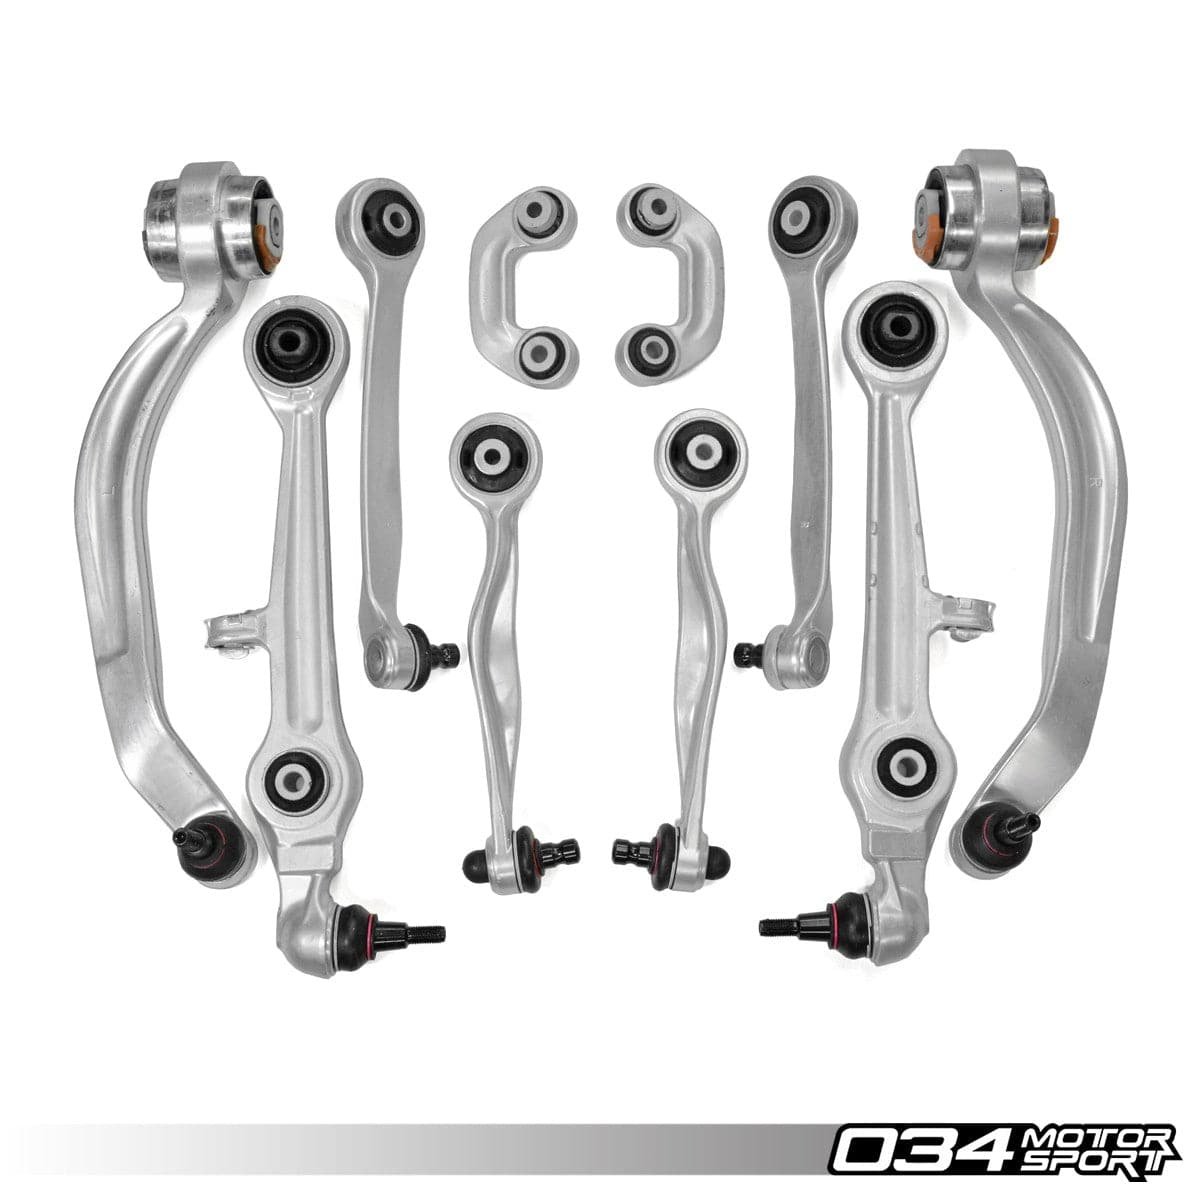 034Motorsport Control Arm Kit, Density Line, Early B5/C5 Audi S4/RS4 & A6/S6/RS6, B5 Volkswagen Passat With Aluminum Uprights